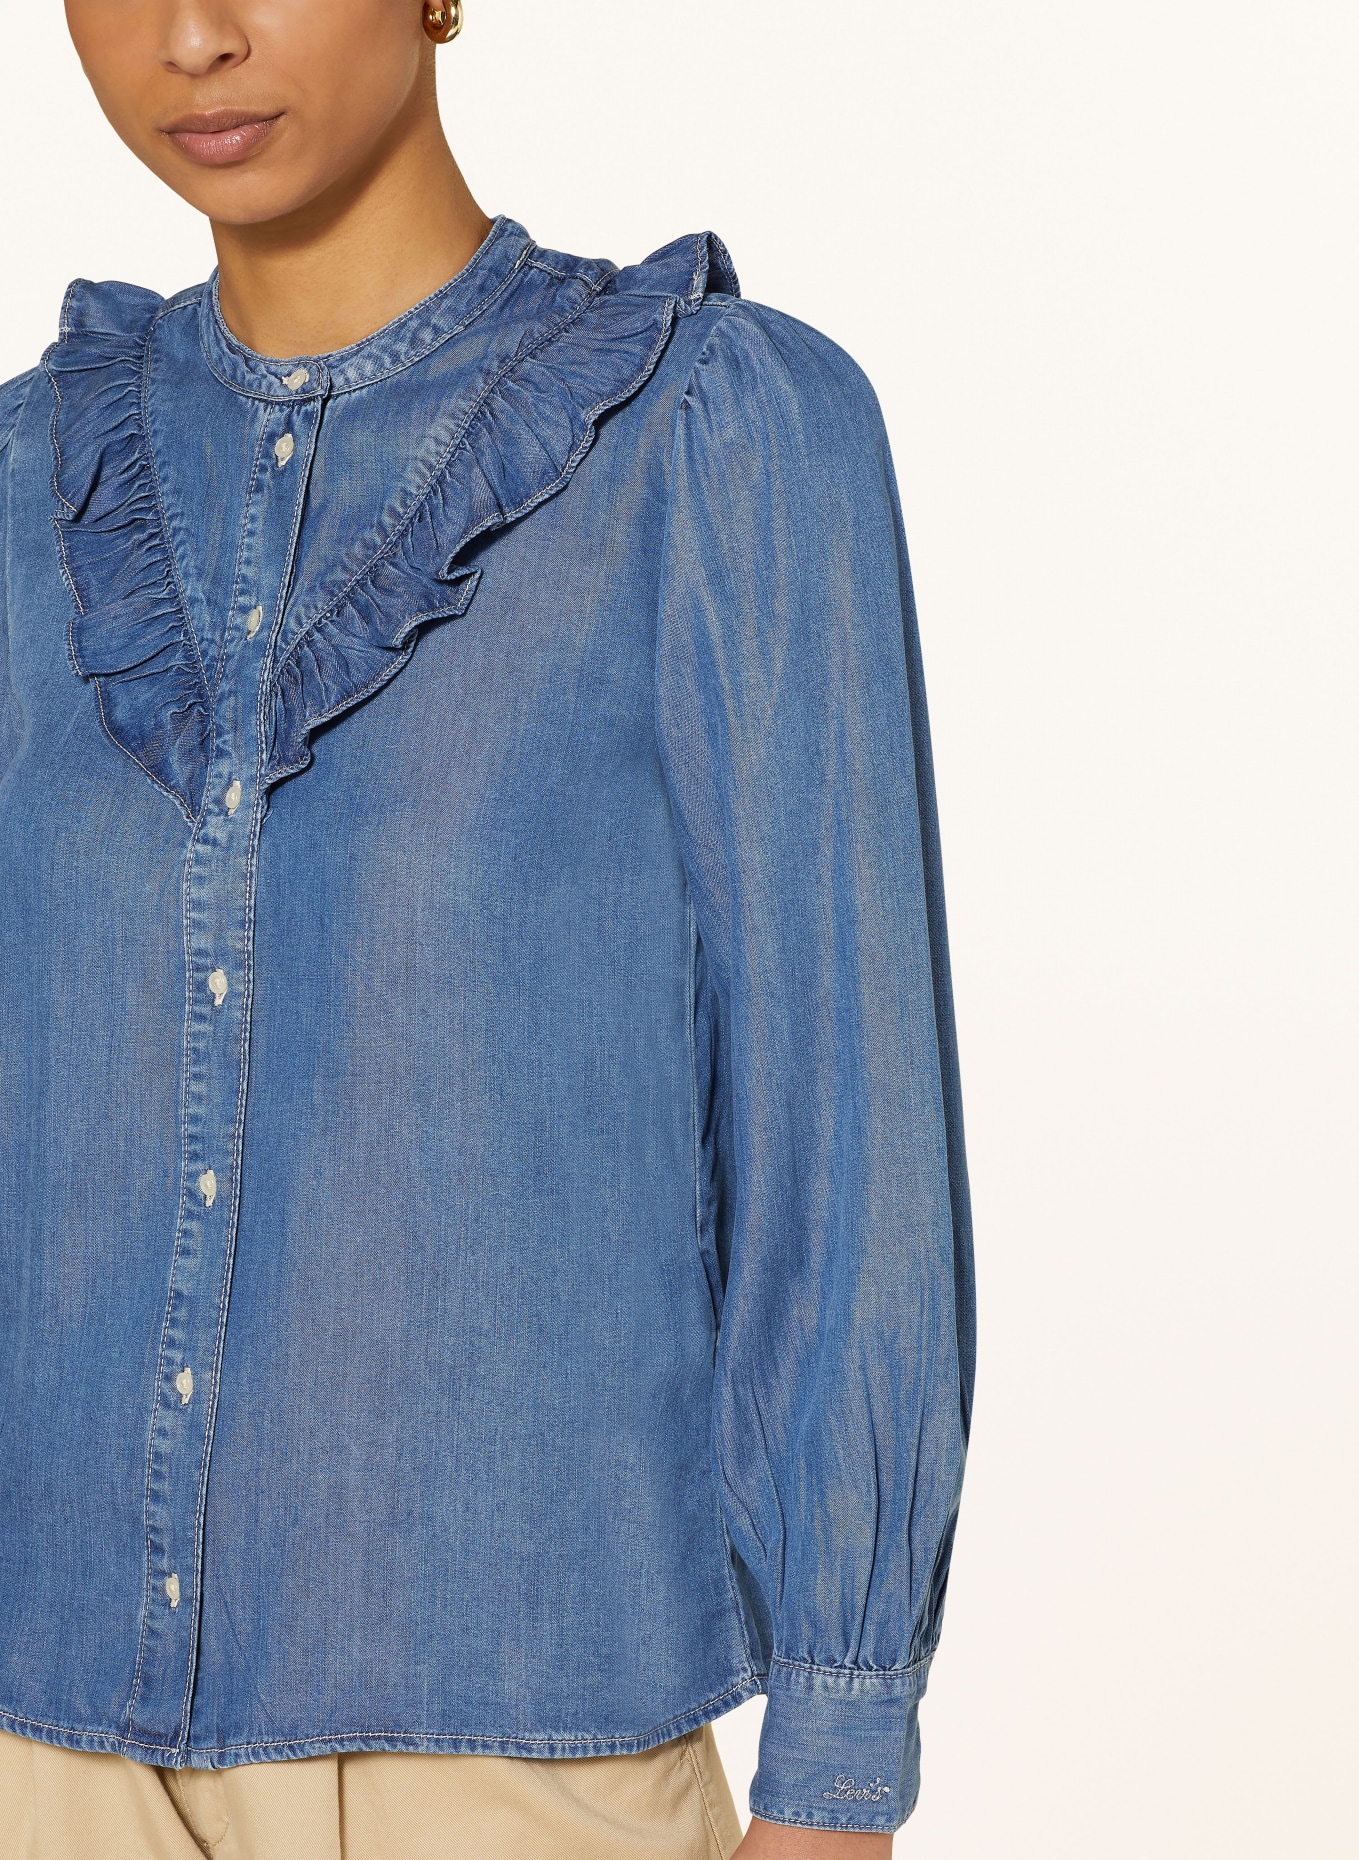 Levi's® Blouse CARINNA in denim look with ruffles, Color: BLUE (Image 4)